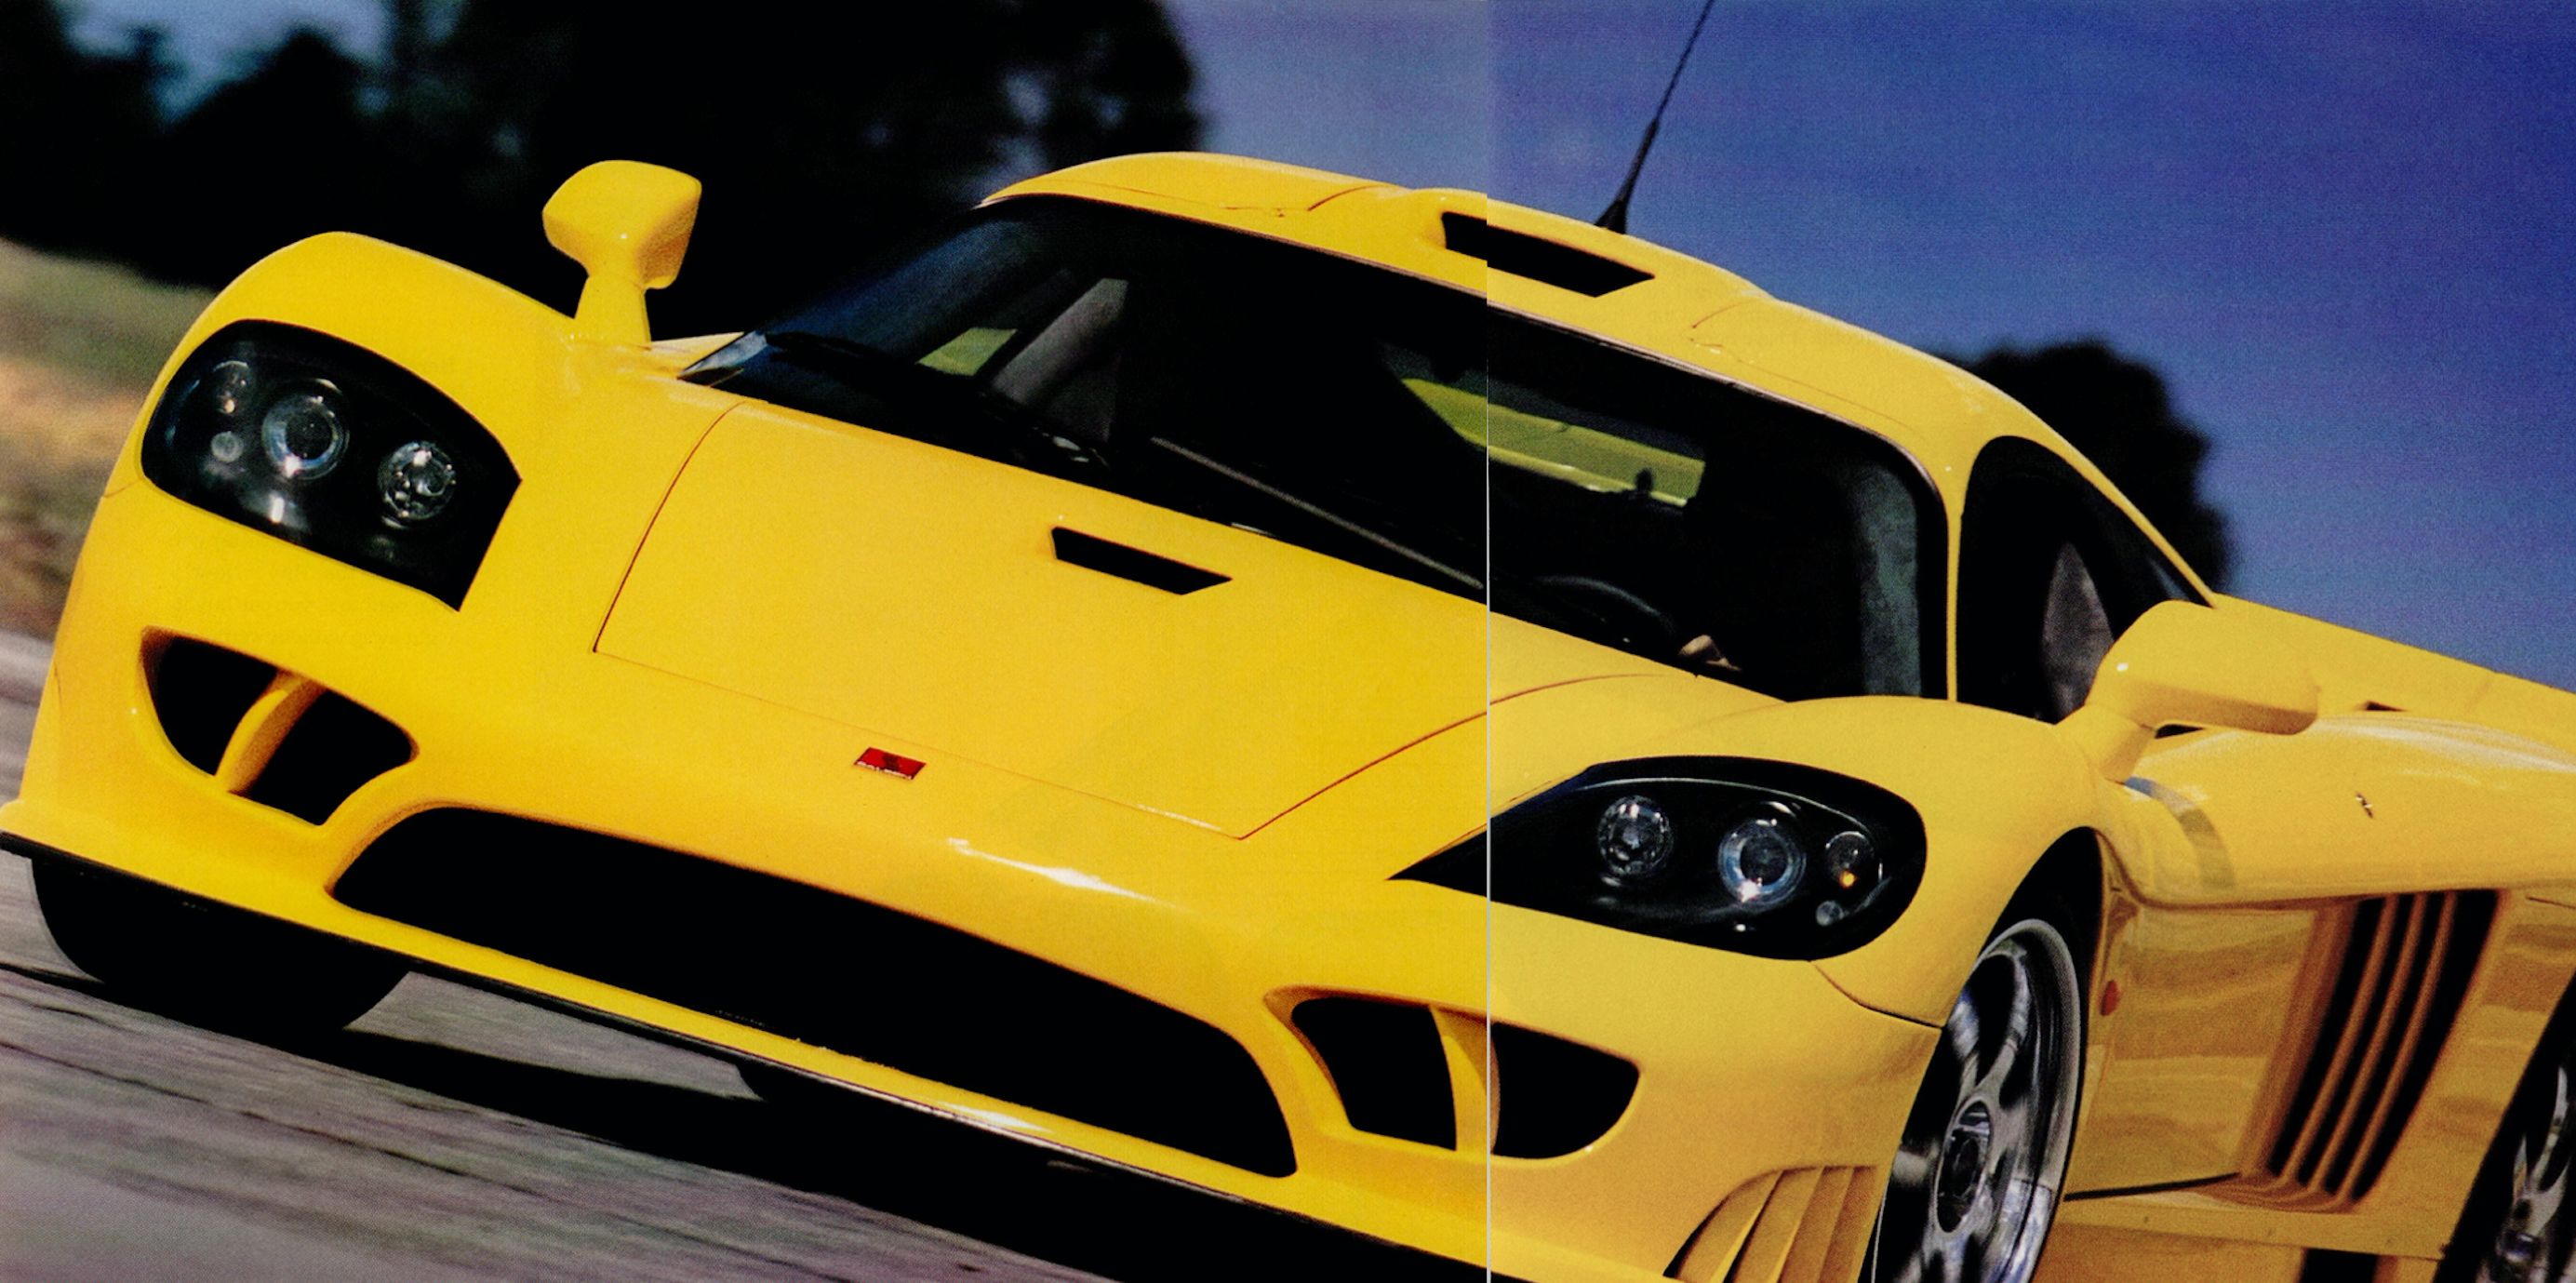 The Saleen S7 Is a Le Mans Racer With a License Plate